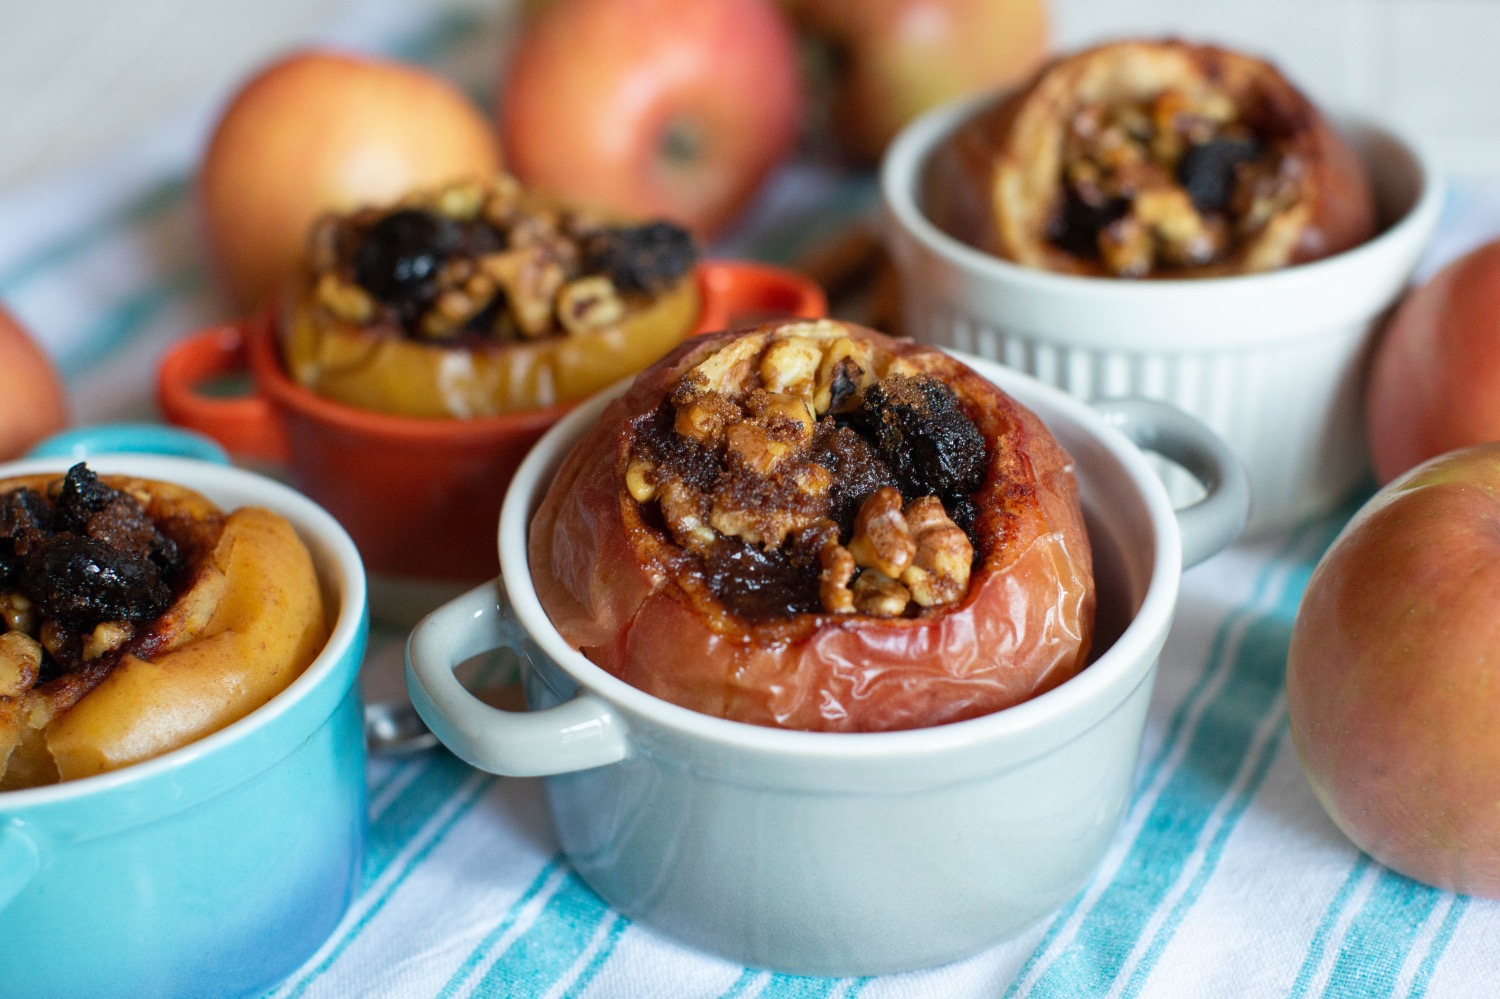 finished baked apples with walnuts and cherries recipe